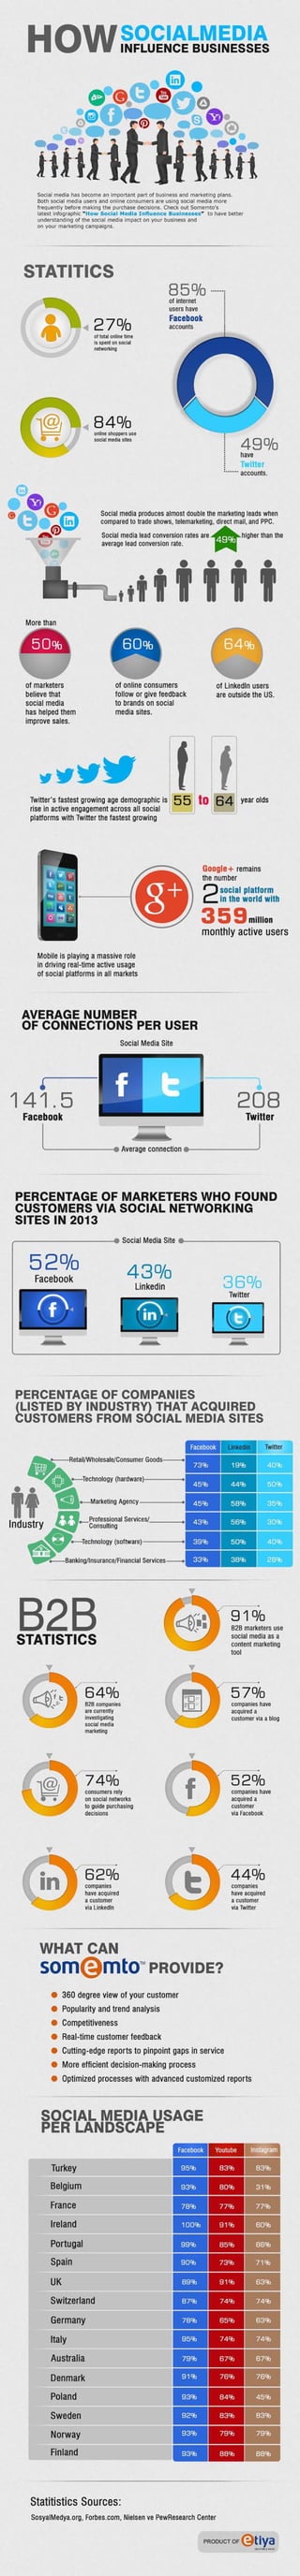 Social media influence on business